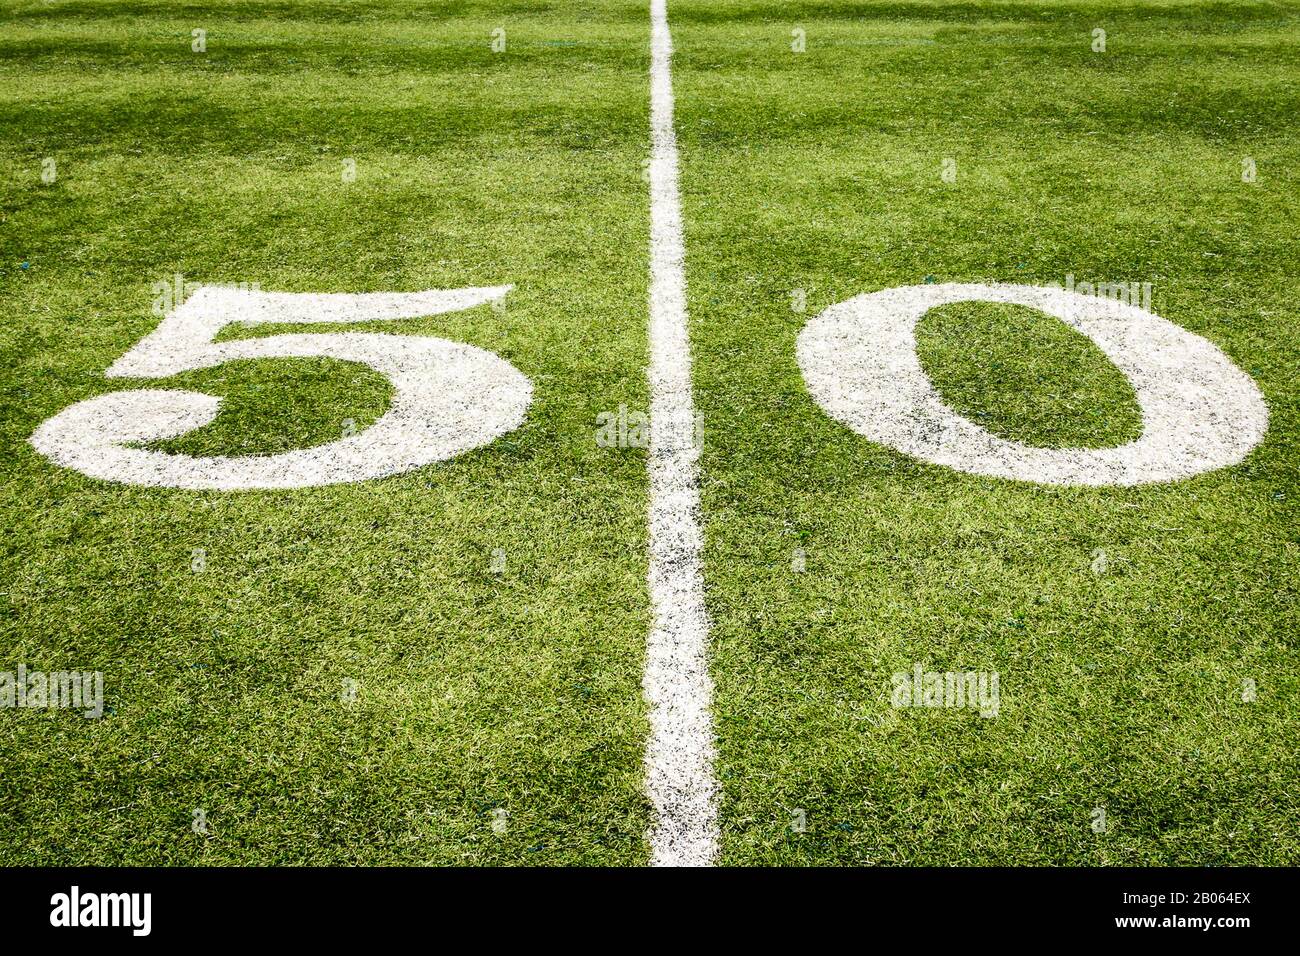 Football Field 50 Yard Line on the Grass with Artificial Turf Stock Photo